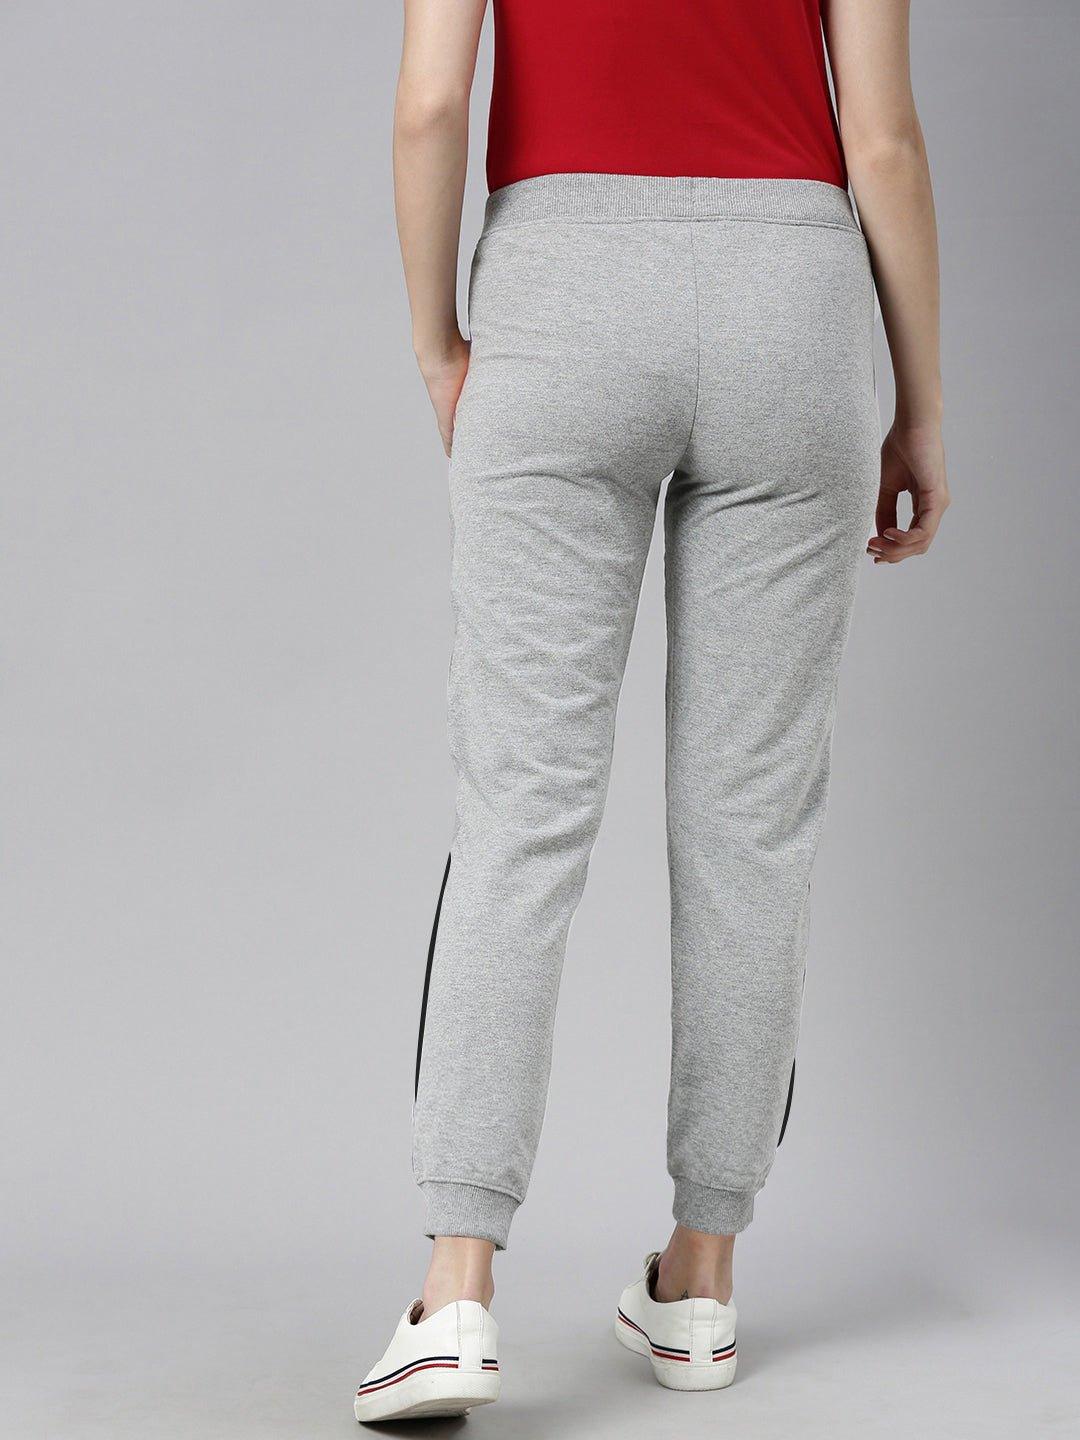 Joggers For Women in Grey Colour Variant 1